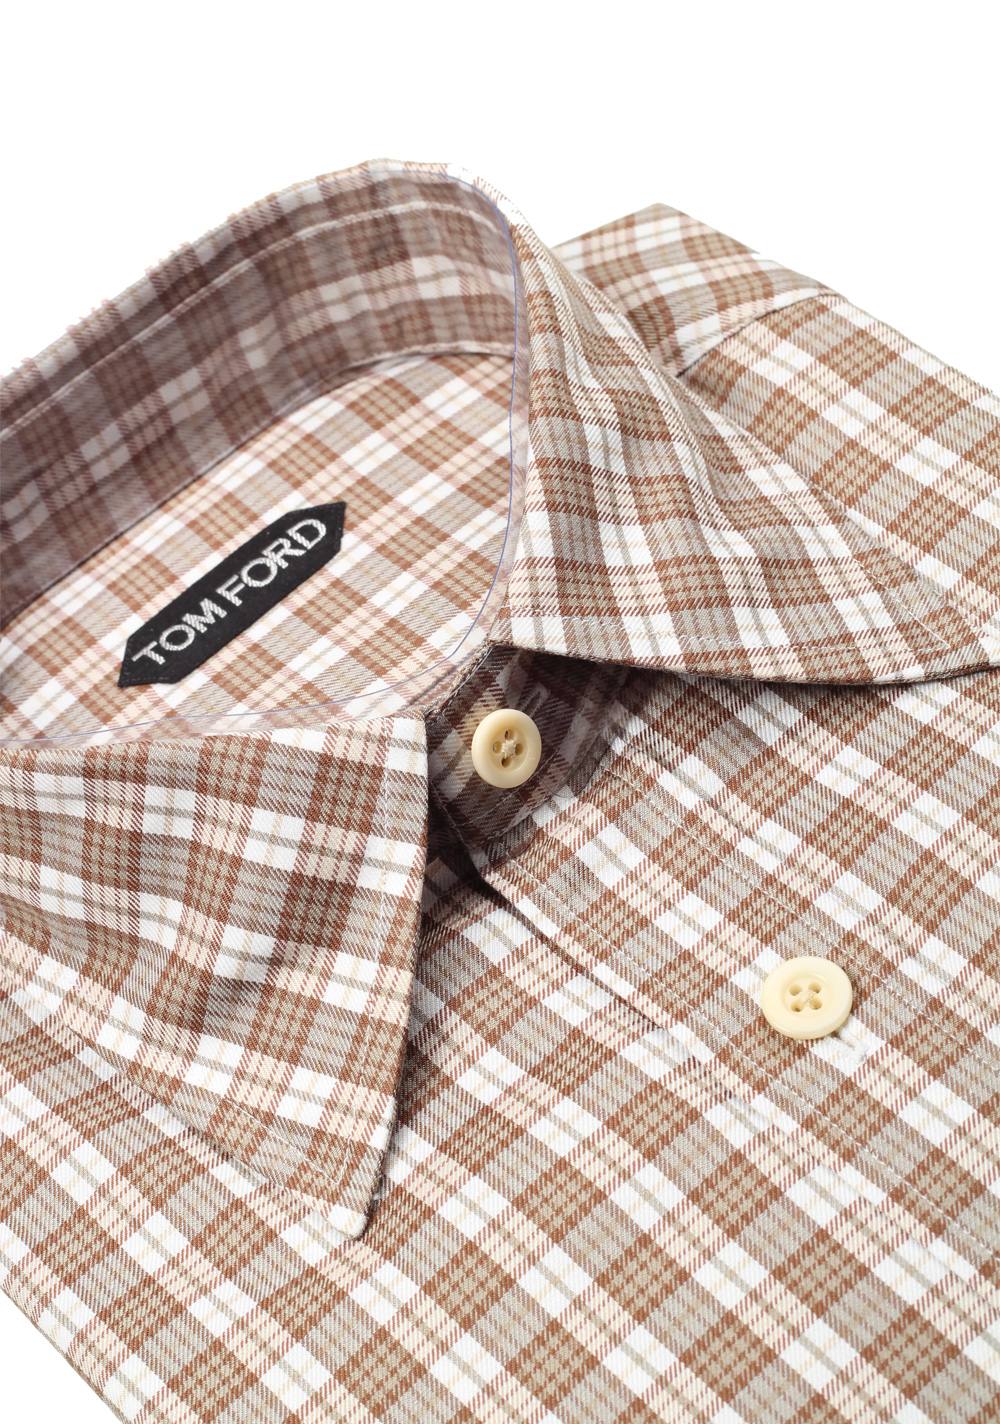 TOM FORD Checked Brown Dress Shirt Size 40 / 15,75 U.S. | Costume Limité